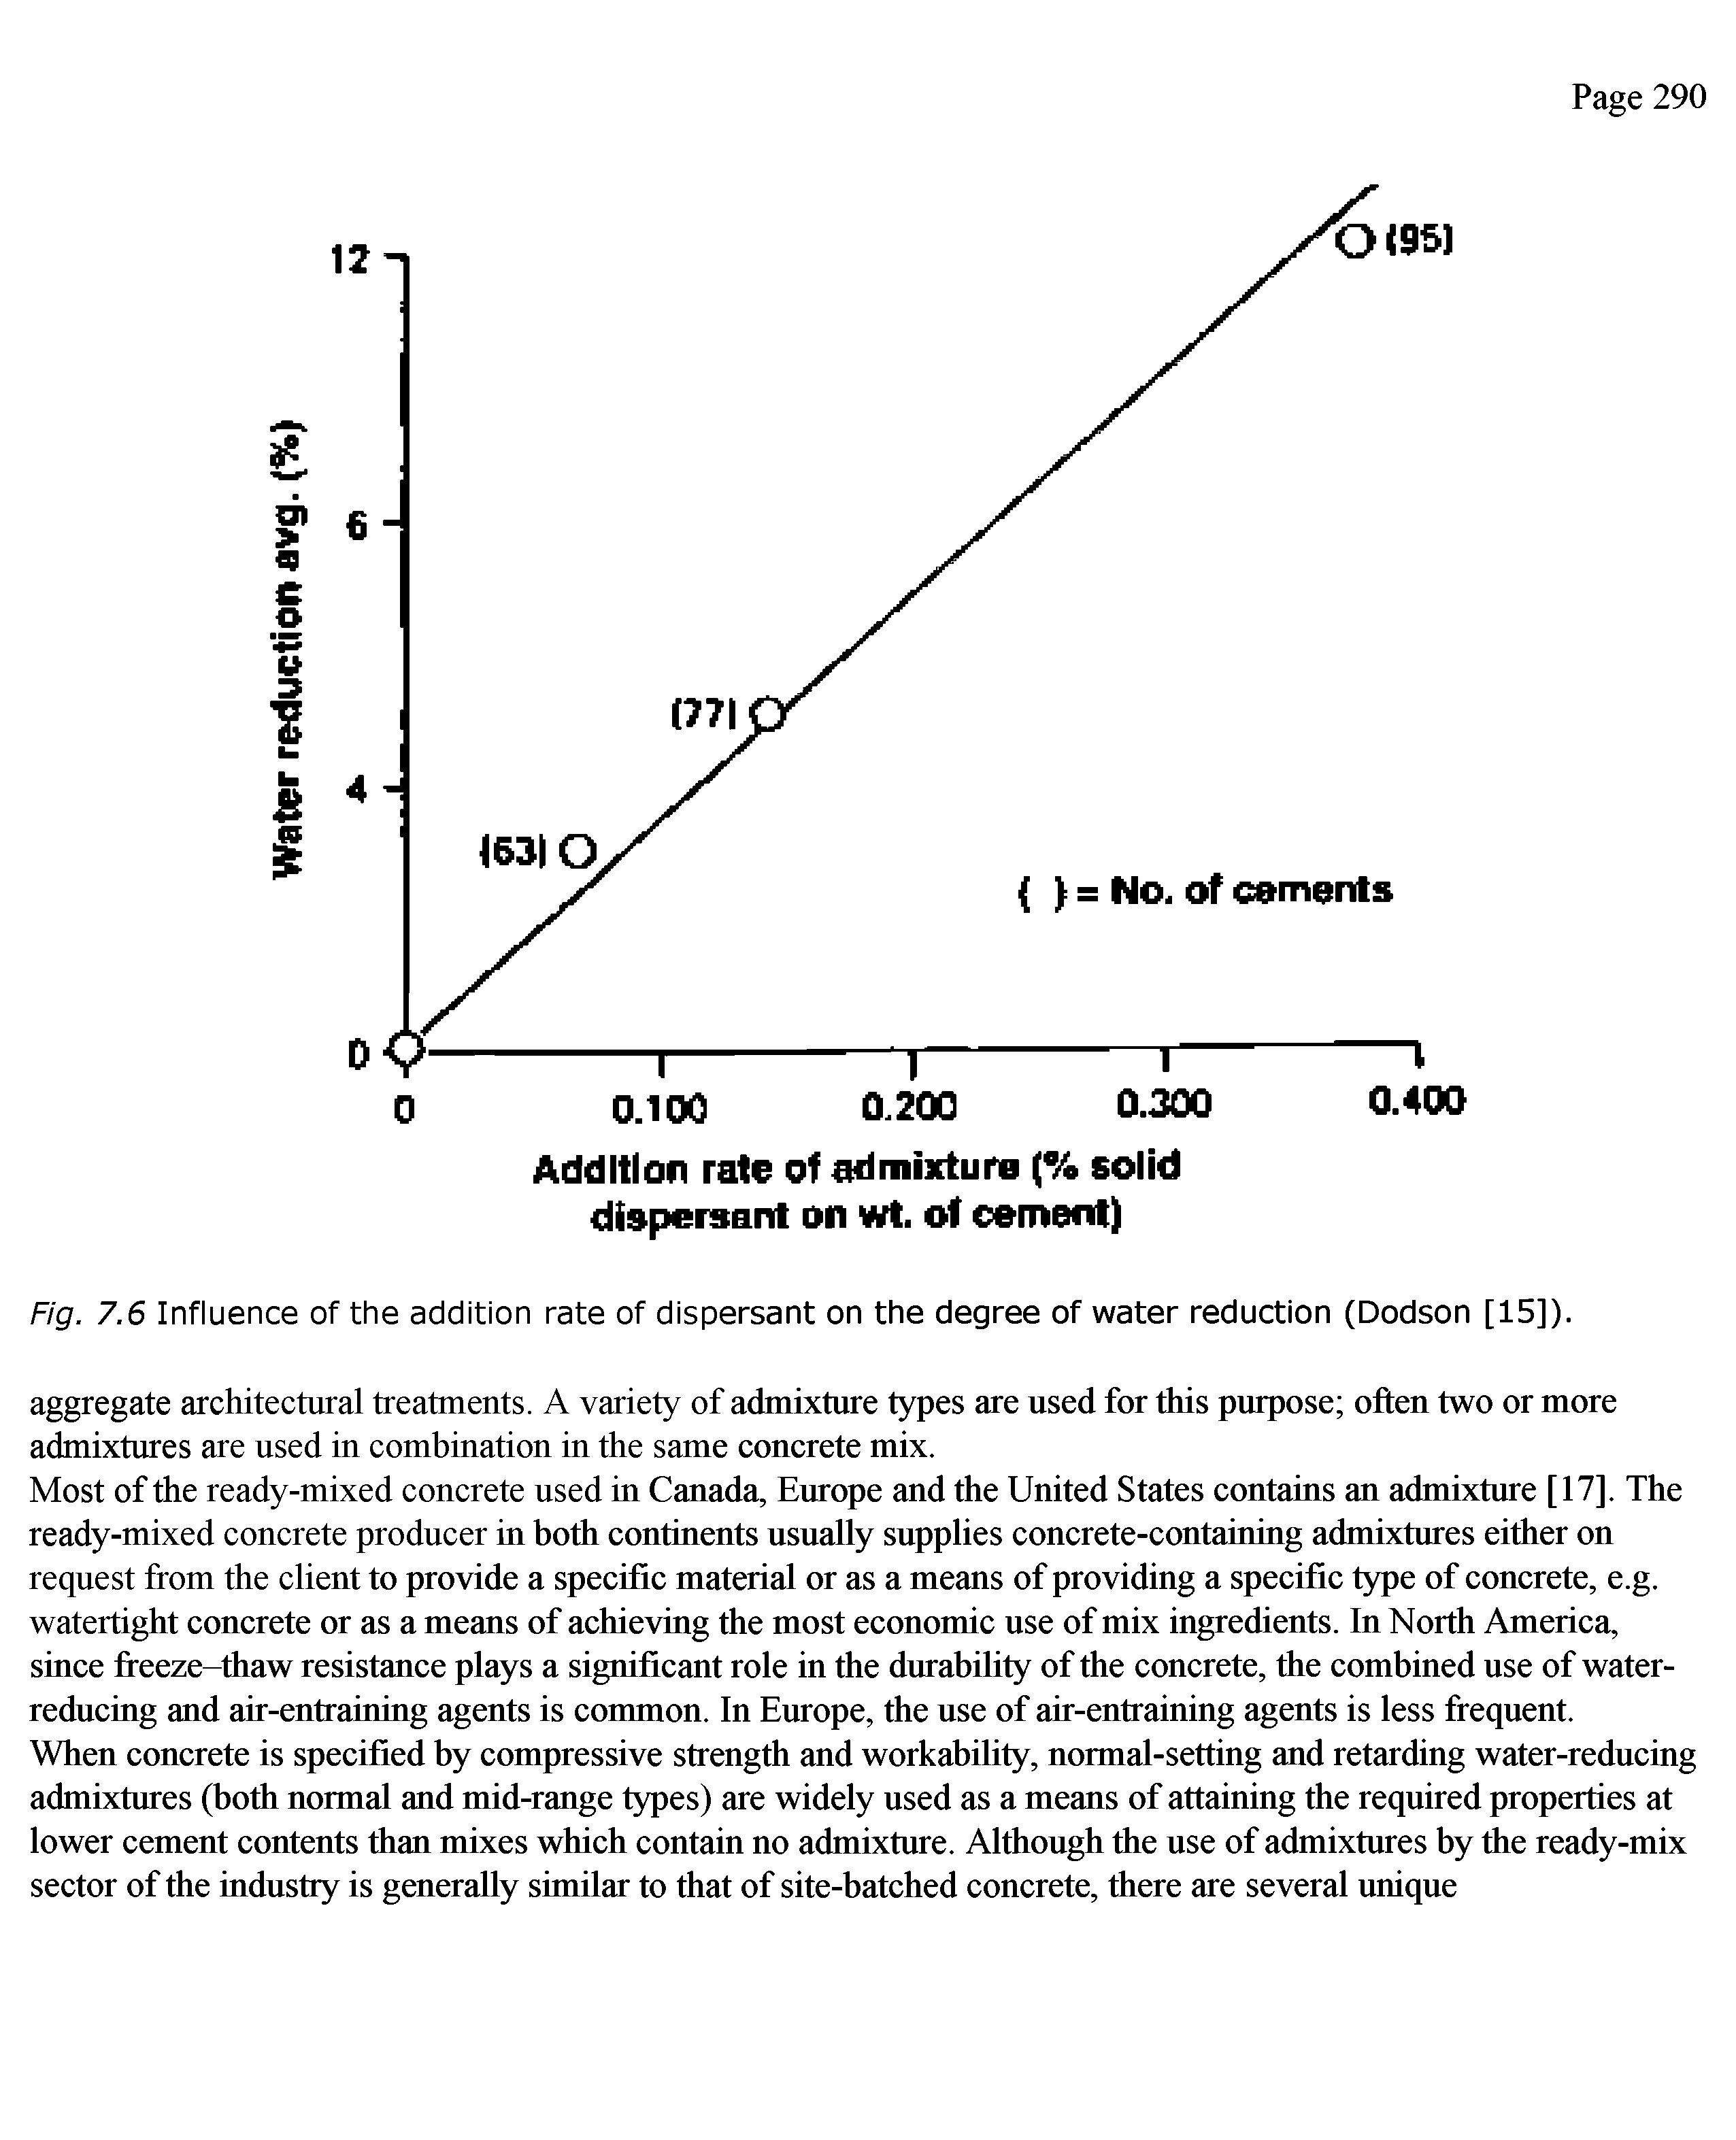 Fig. 7.6 Influence of the addition rate of dispersant on the degree of water reduction (Dodson [15]).